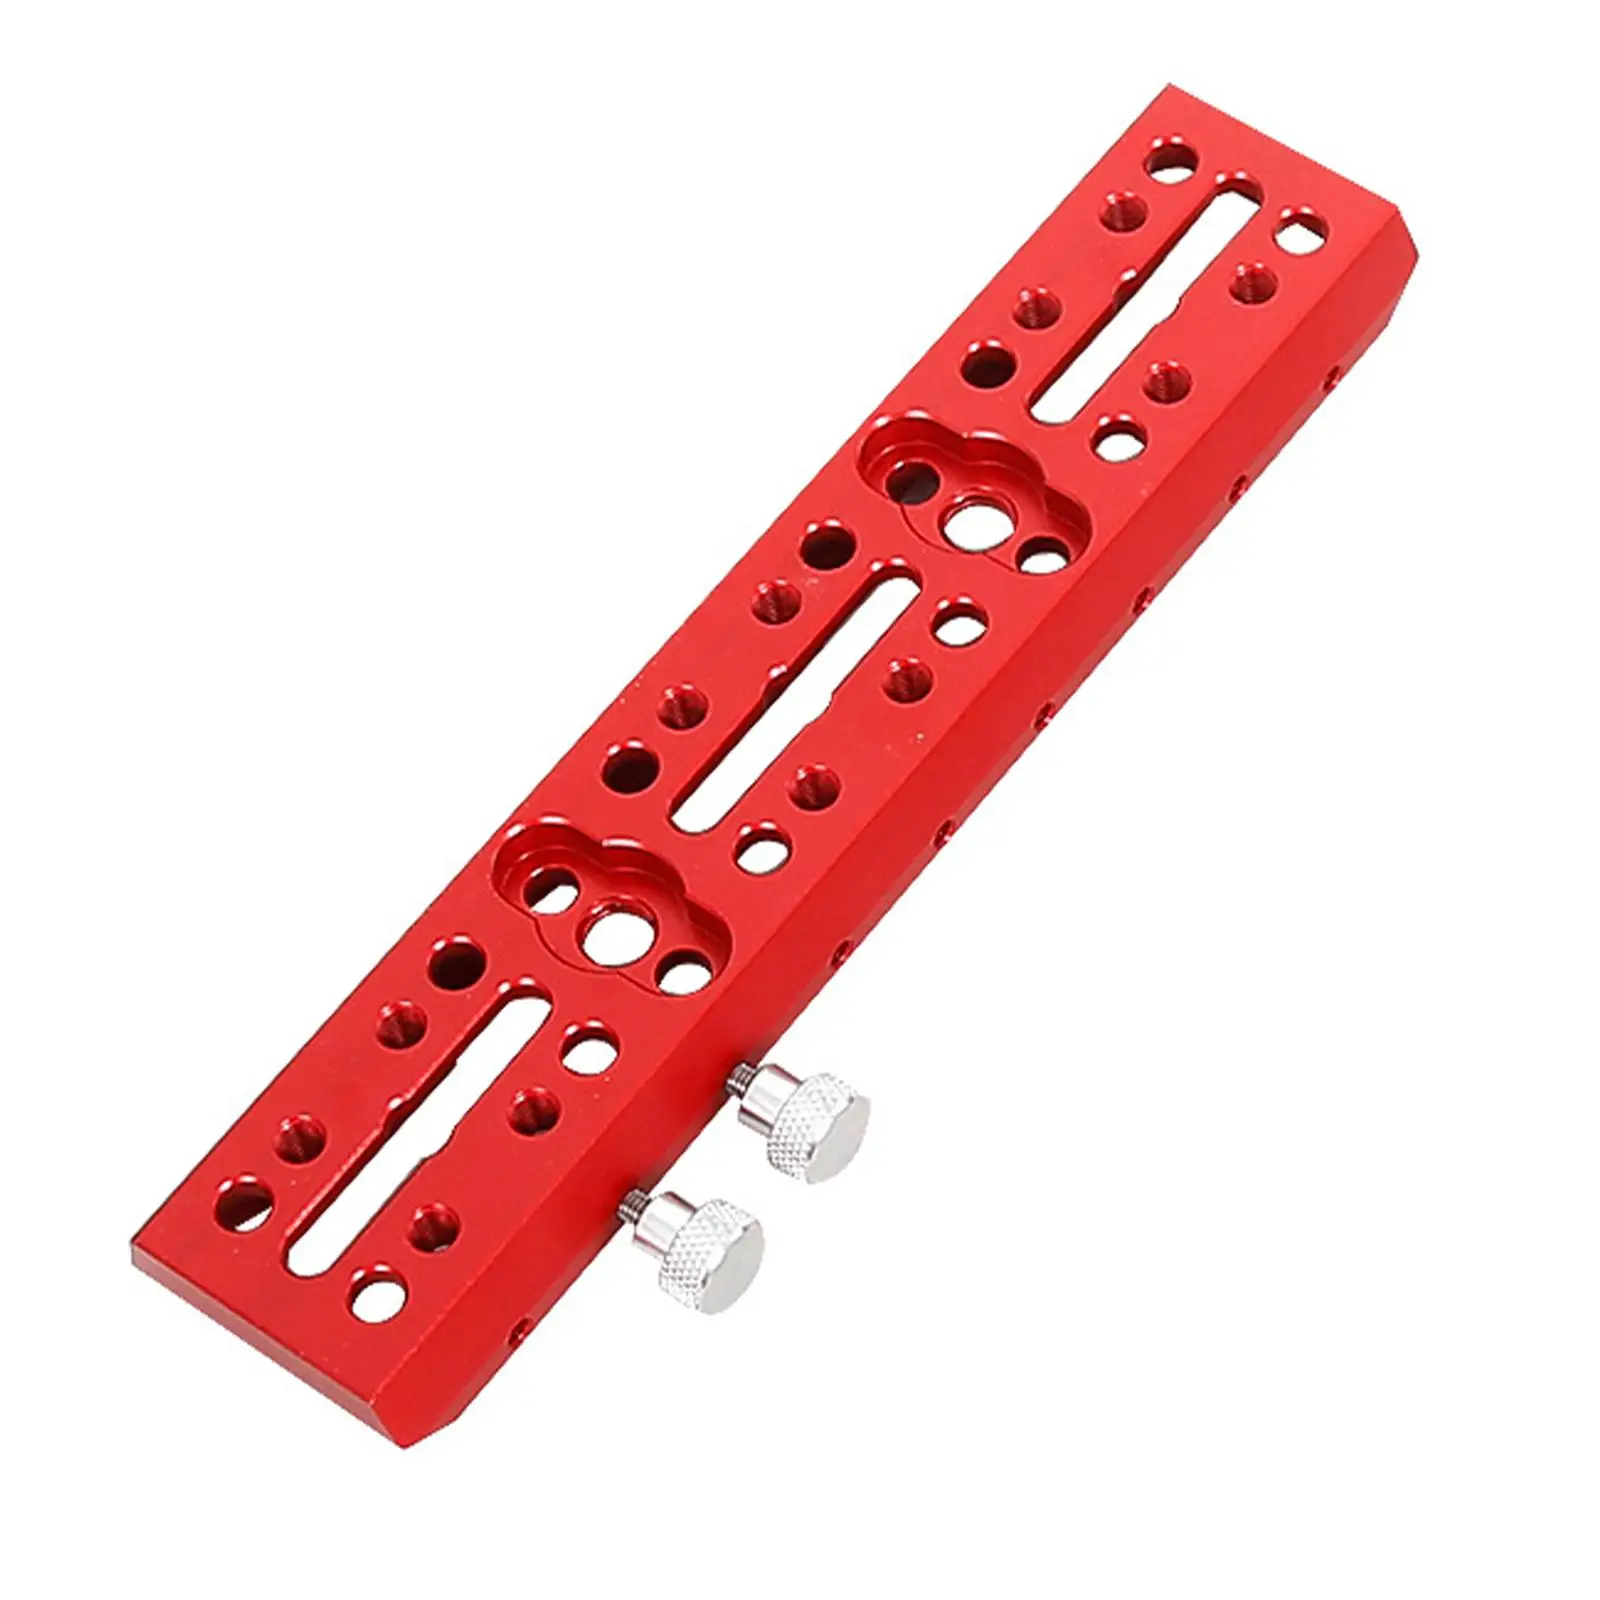 Dovetail Mounting Fixing Plate Standard Dovetail Plate for 2042 Repair Part